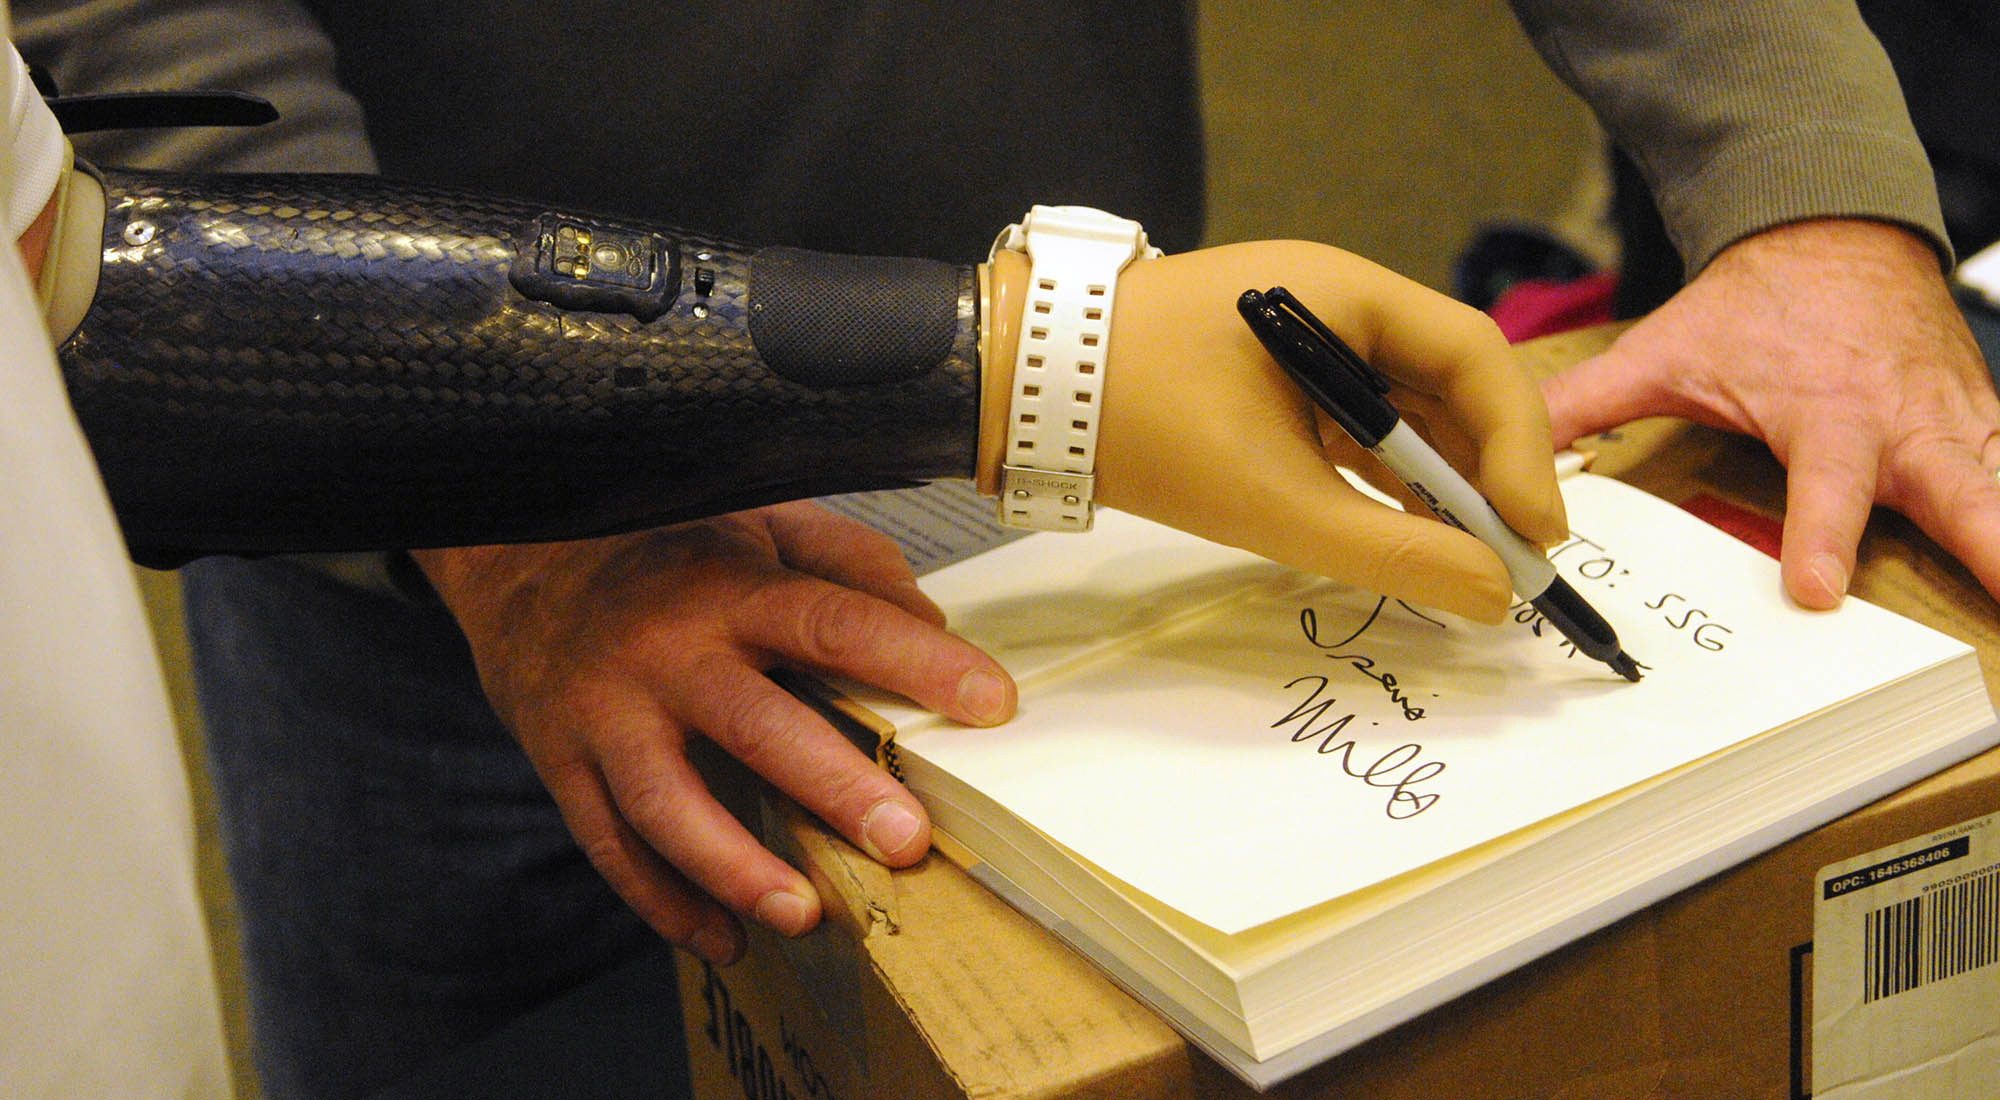 Travis Mills autographs a copy of his book &quot;Tough As They Come&quot; with his left prosthetic hand last month at a Barnes and Noble store in Augusta, Maine.